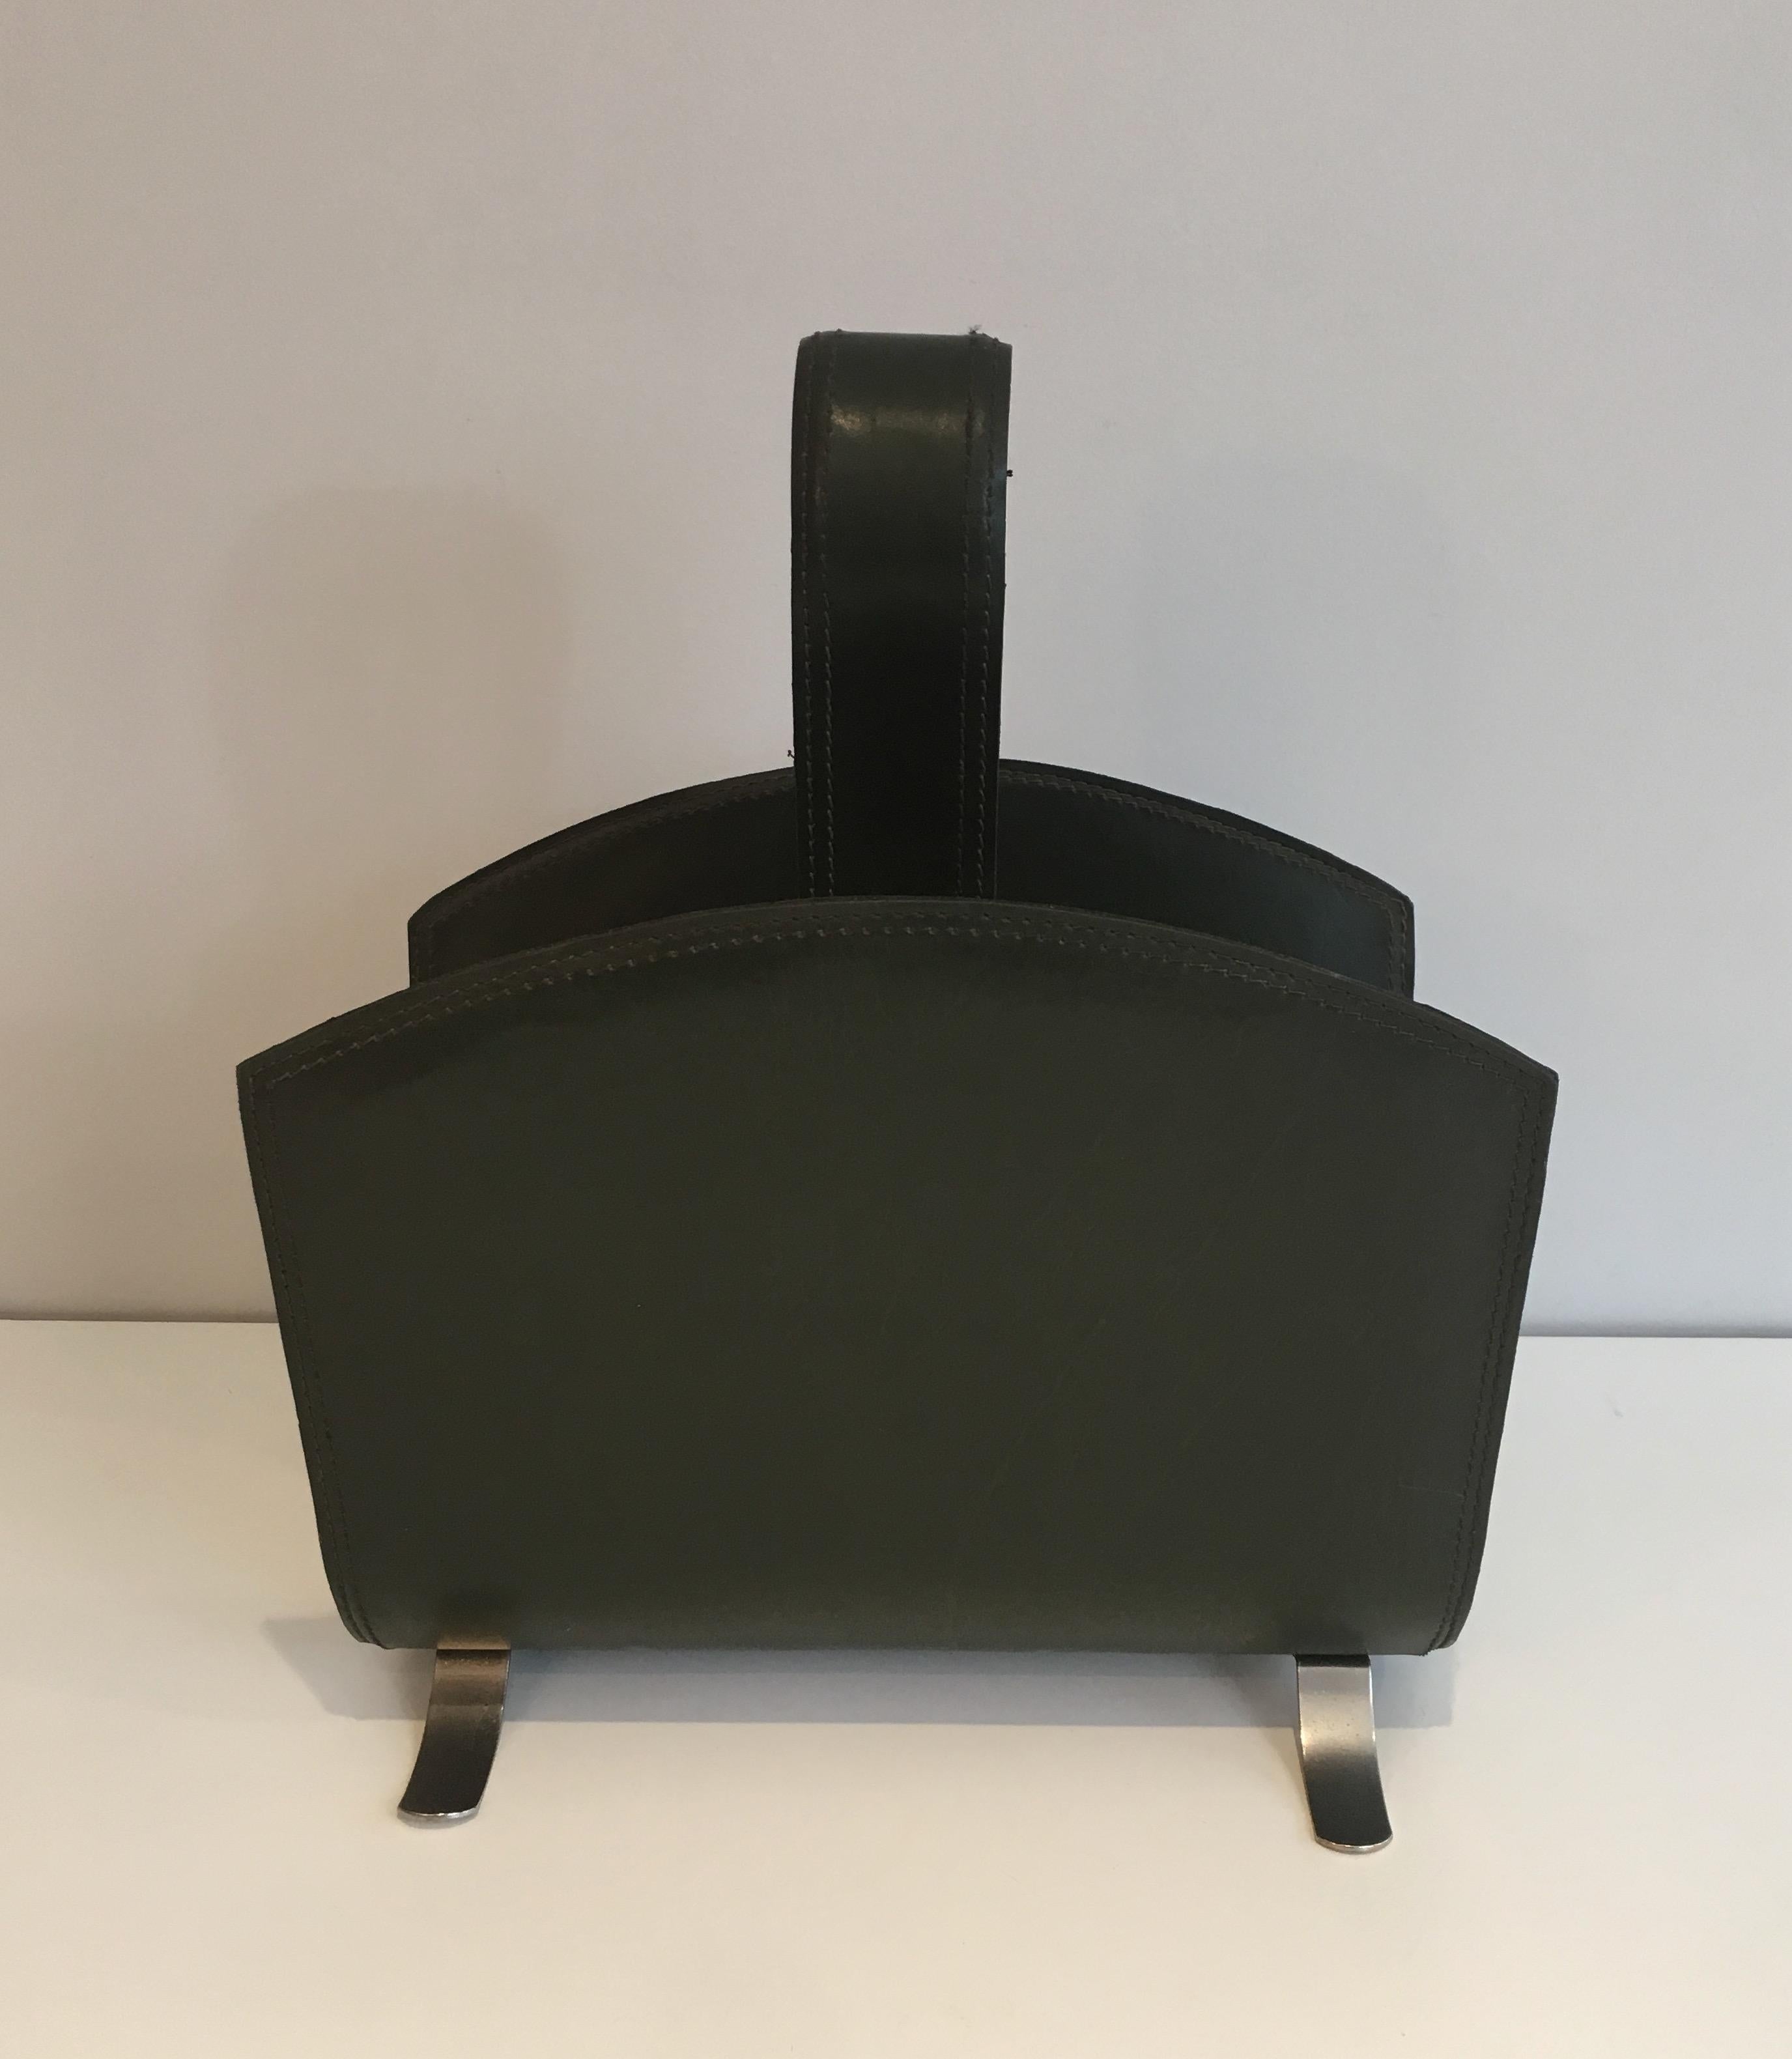 This magazine rack is made of black leather on a brushed steel base. This is a French work, in the style of famous designer Jacques Adnet, circa 1950.